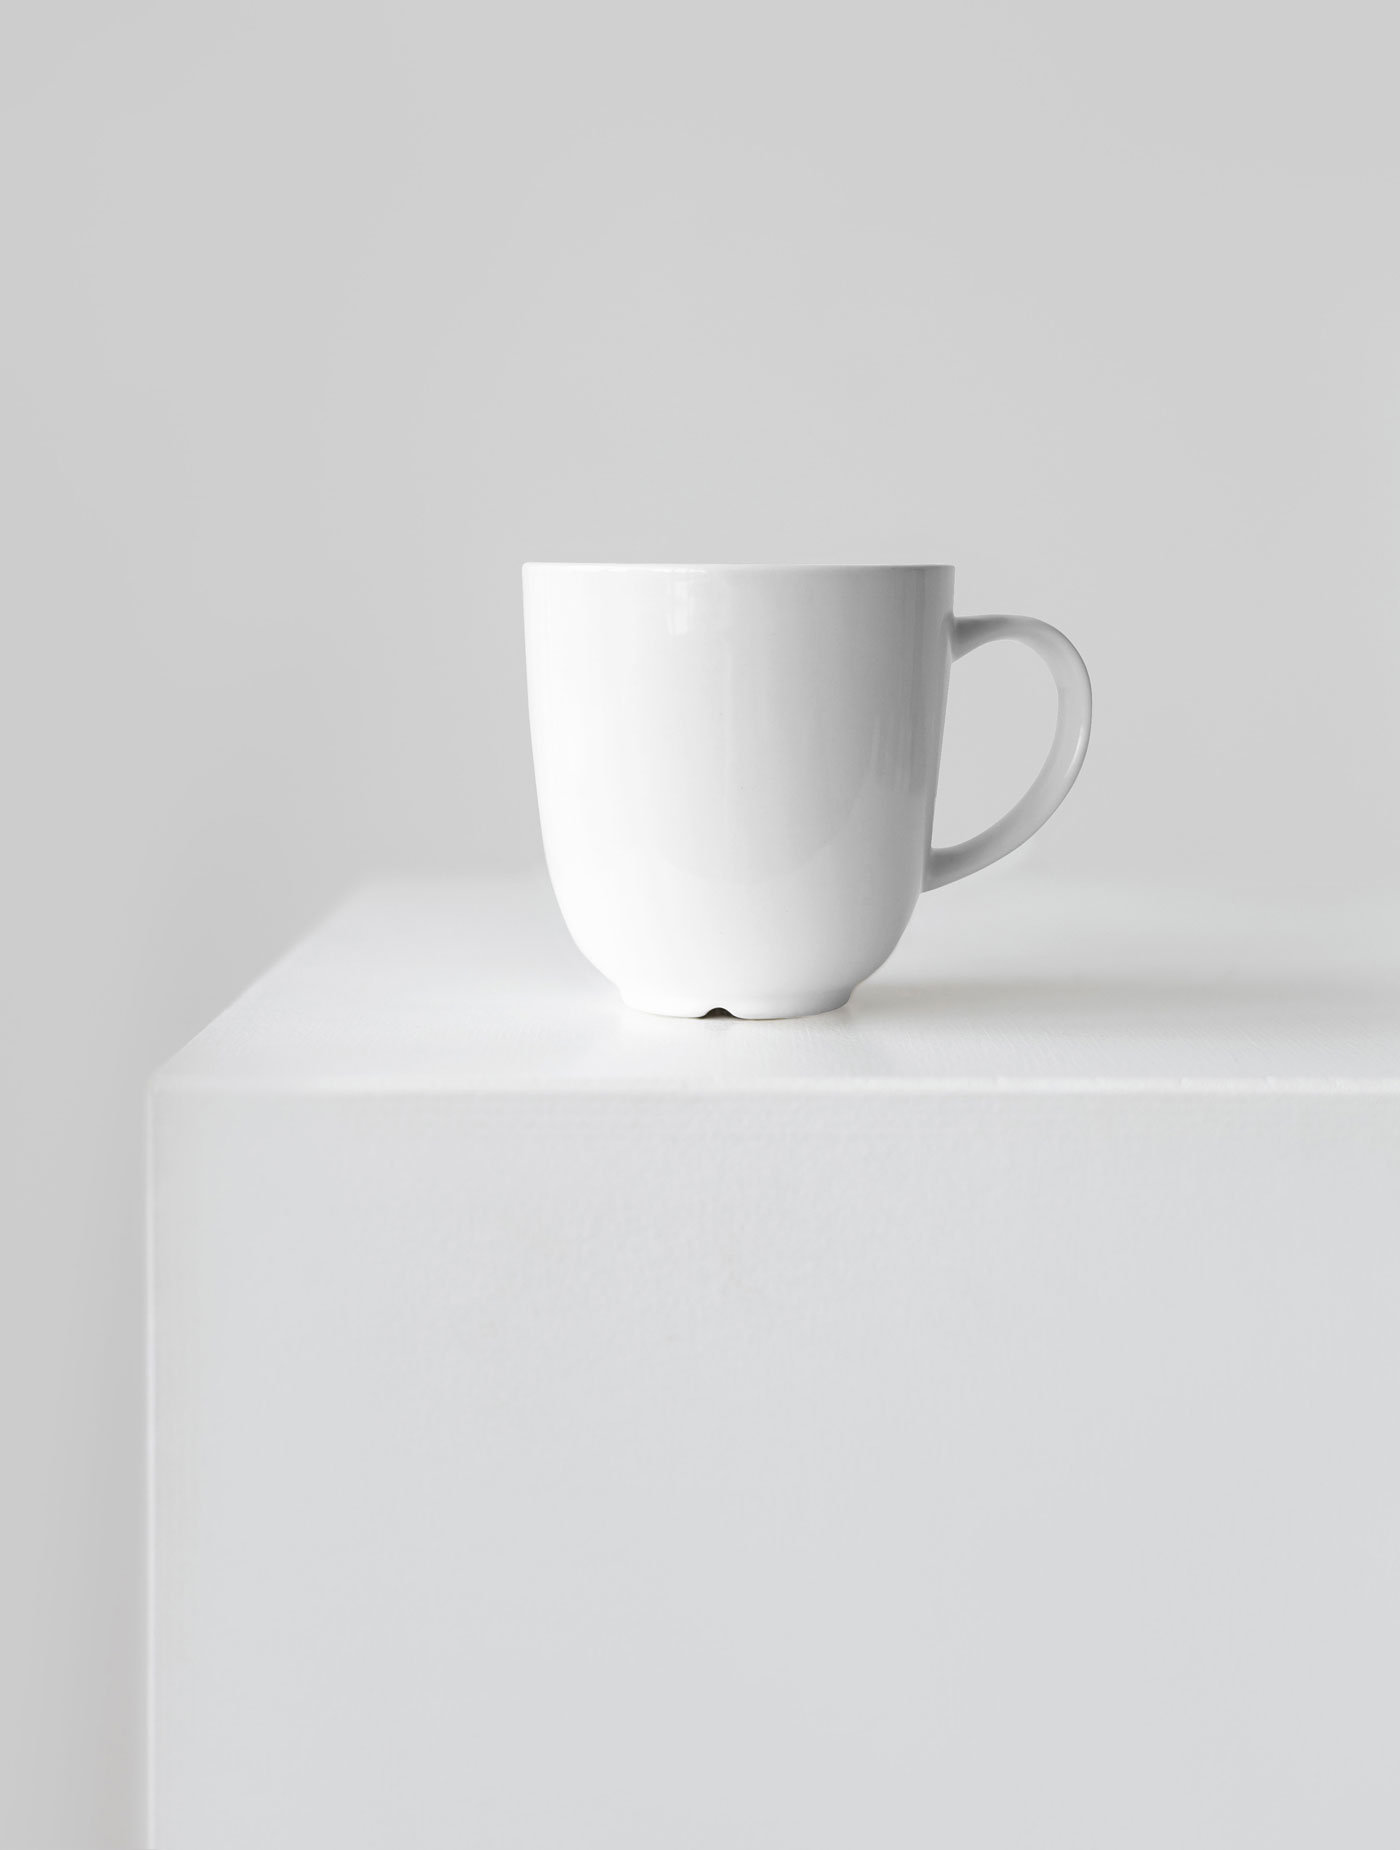 Front View of a Ceramic Mug Mockup on a Cube FREE PSD